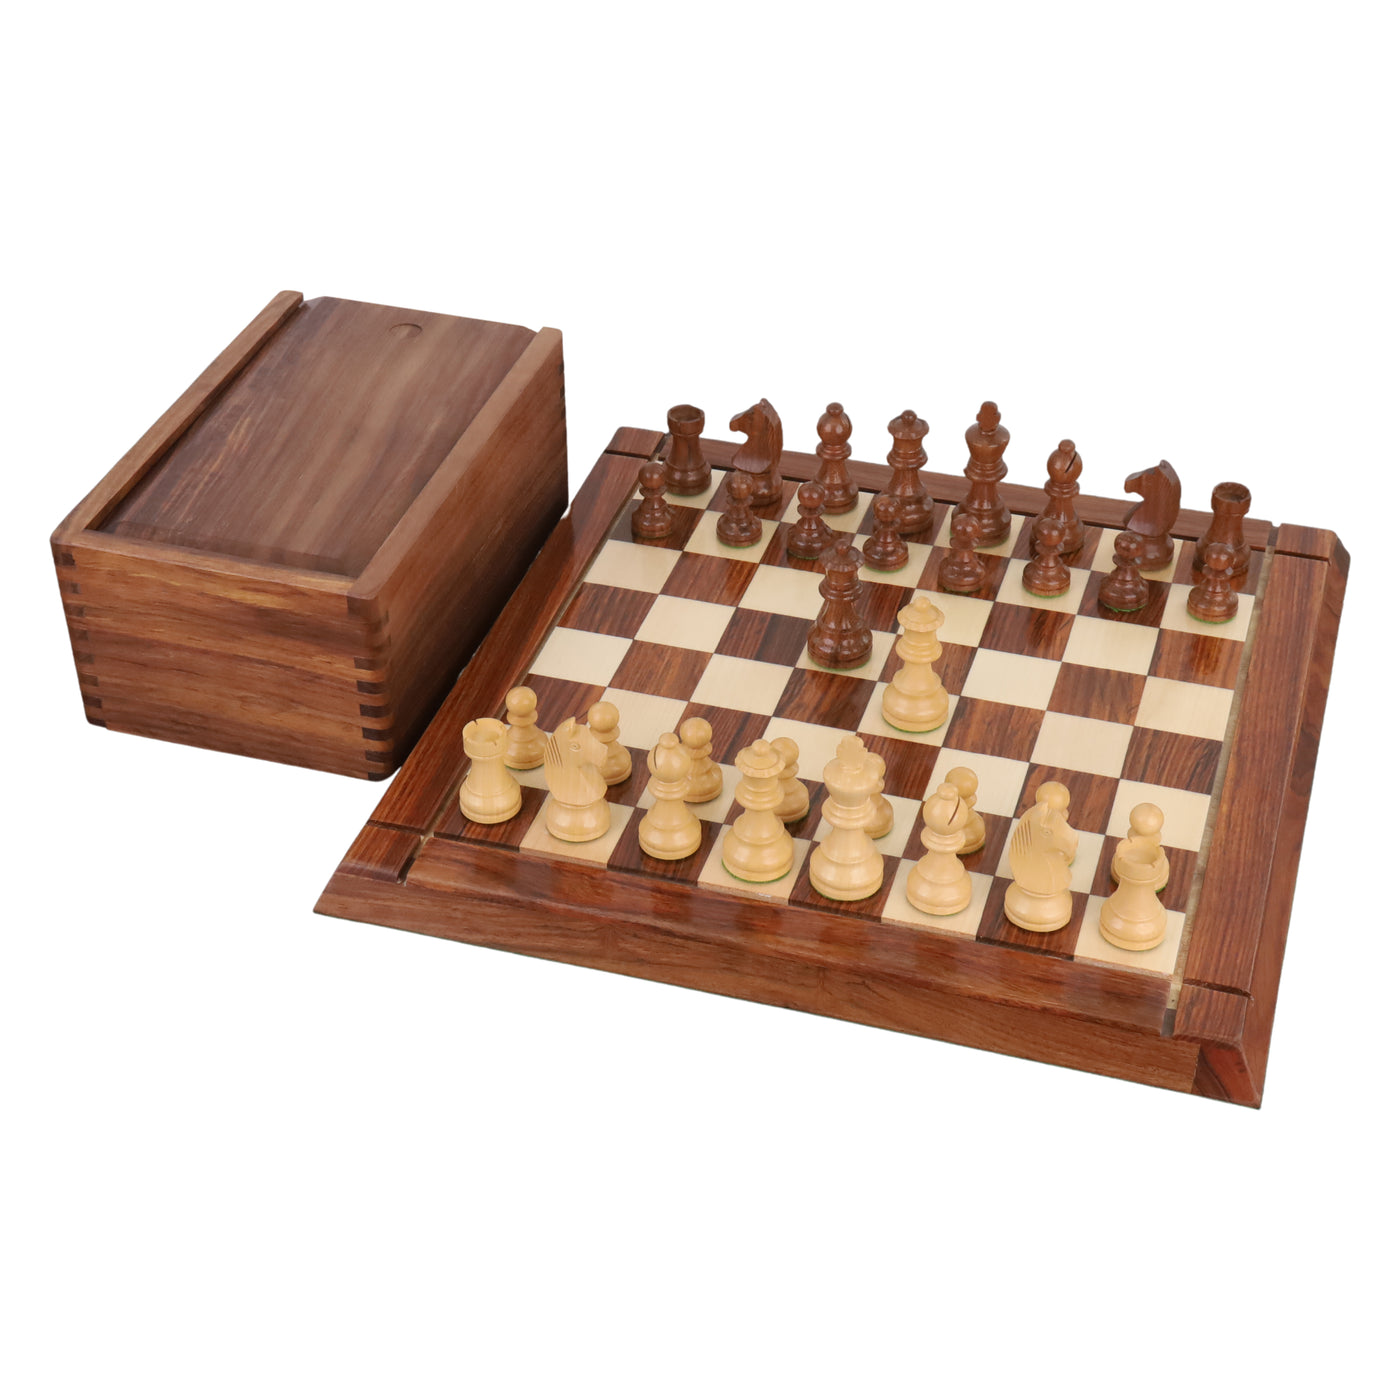 2.75" Tournament Staunton Chess Pieces Only Set - Golden Rosewood - Compact size